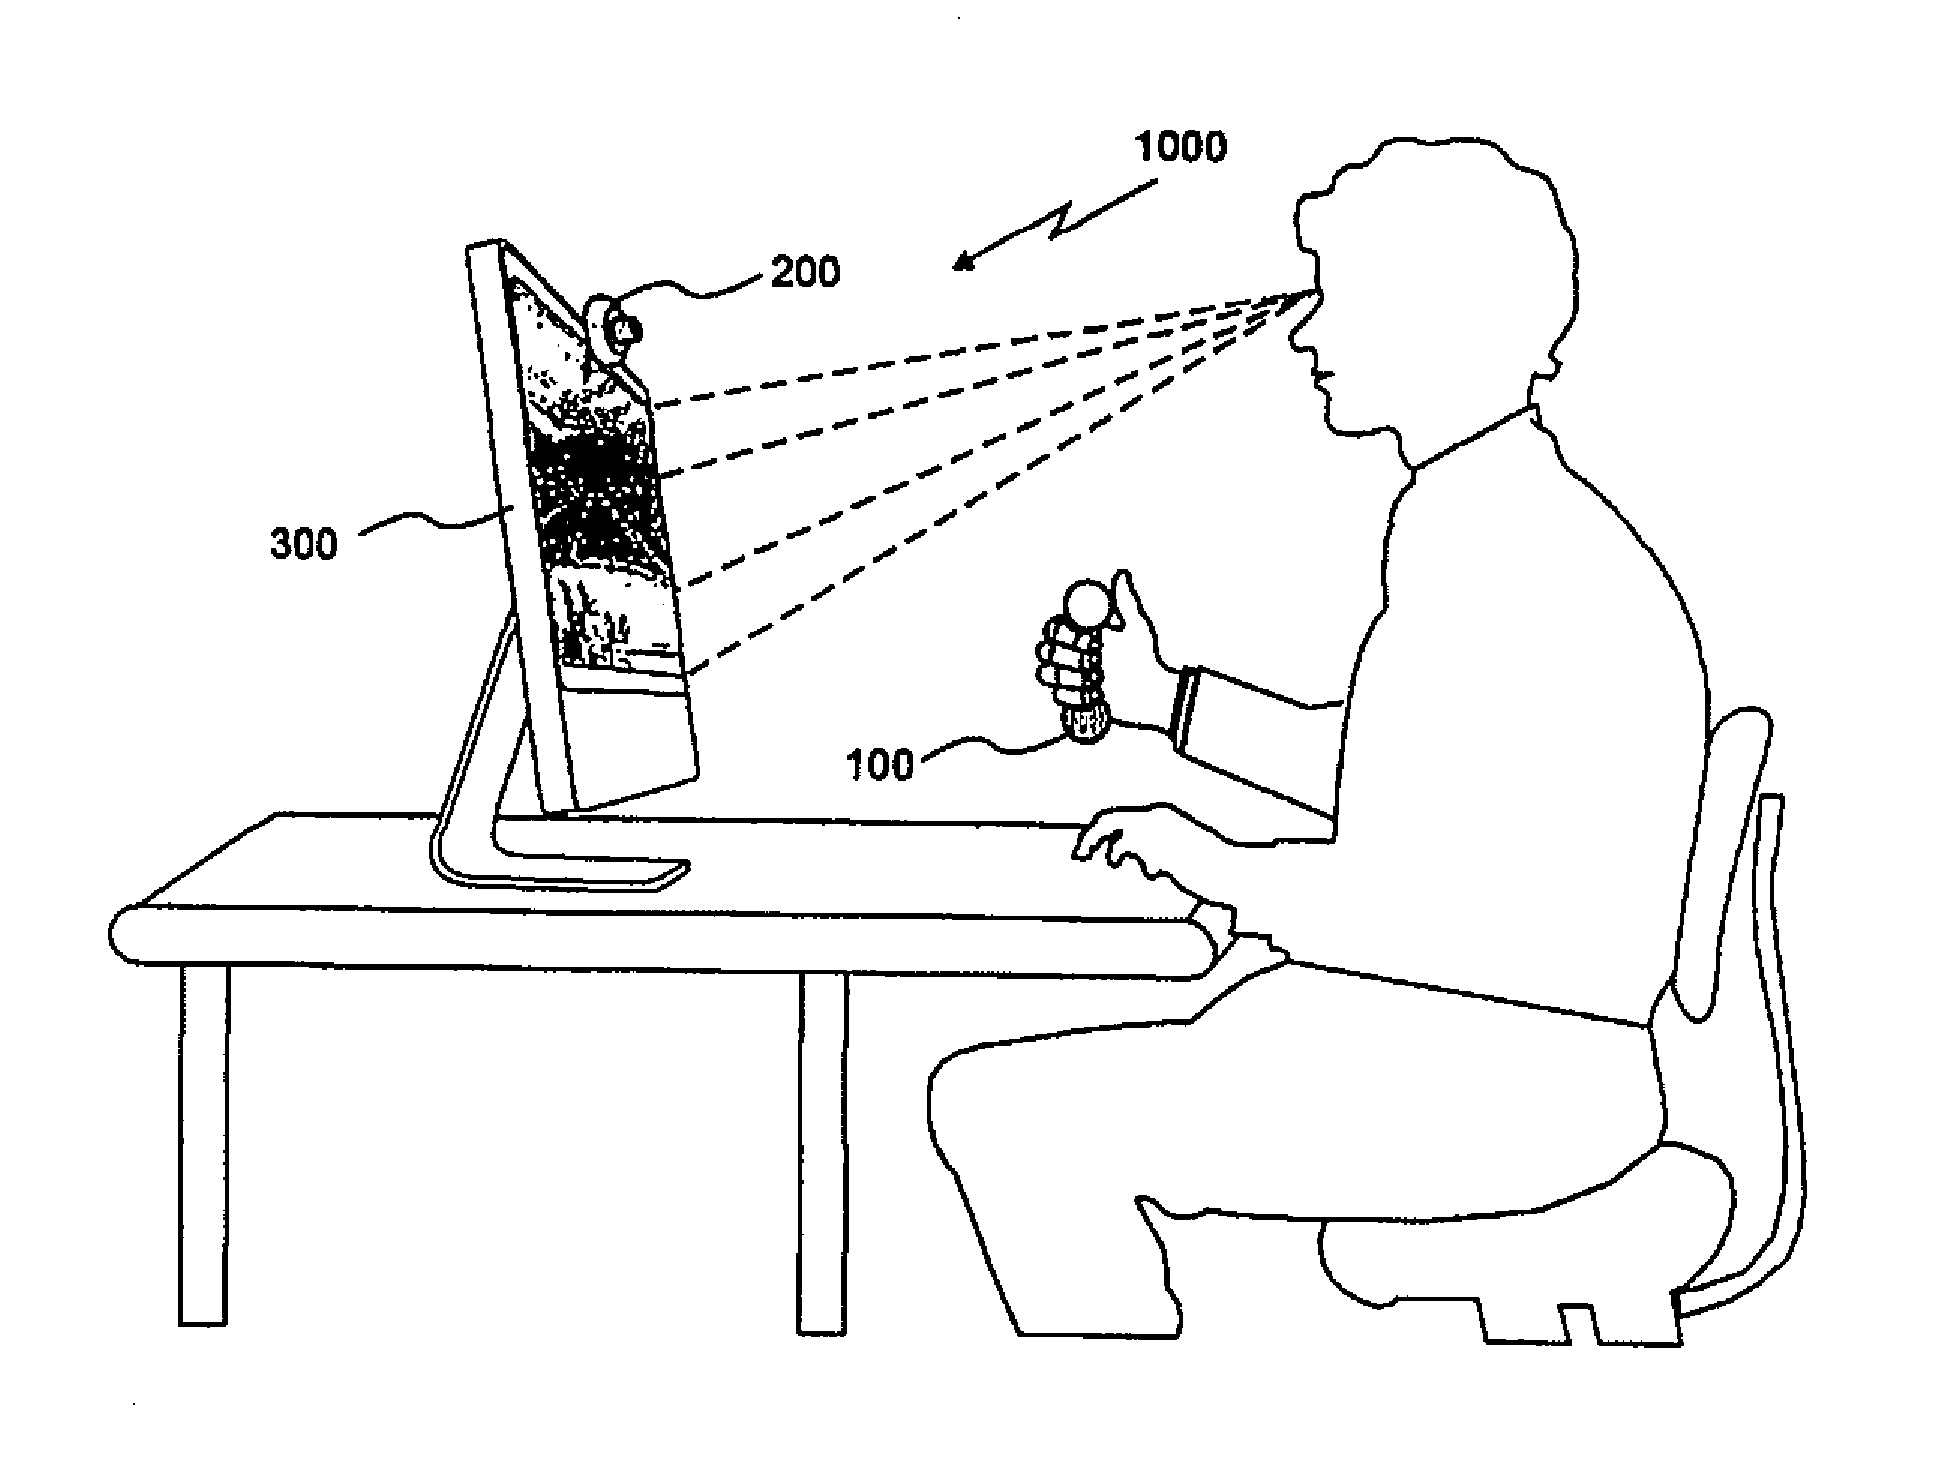 3D monocular visual tracking therapy system for the rehabilitation of human upper limbs